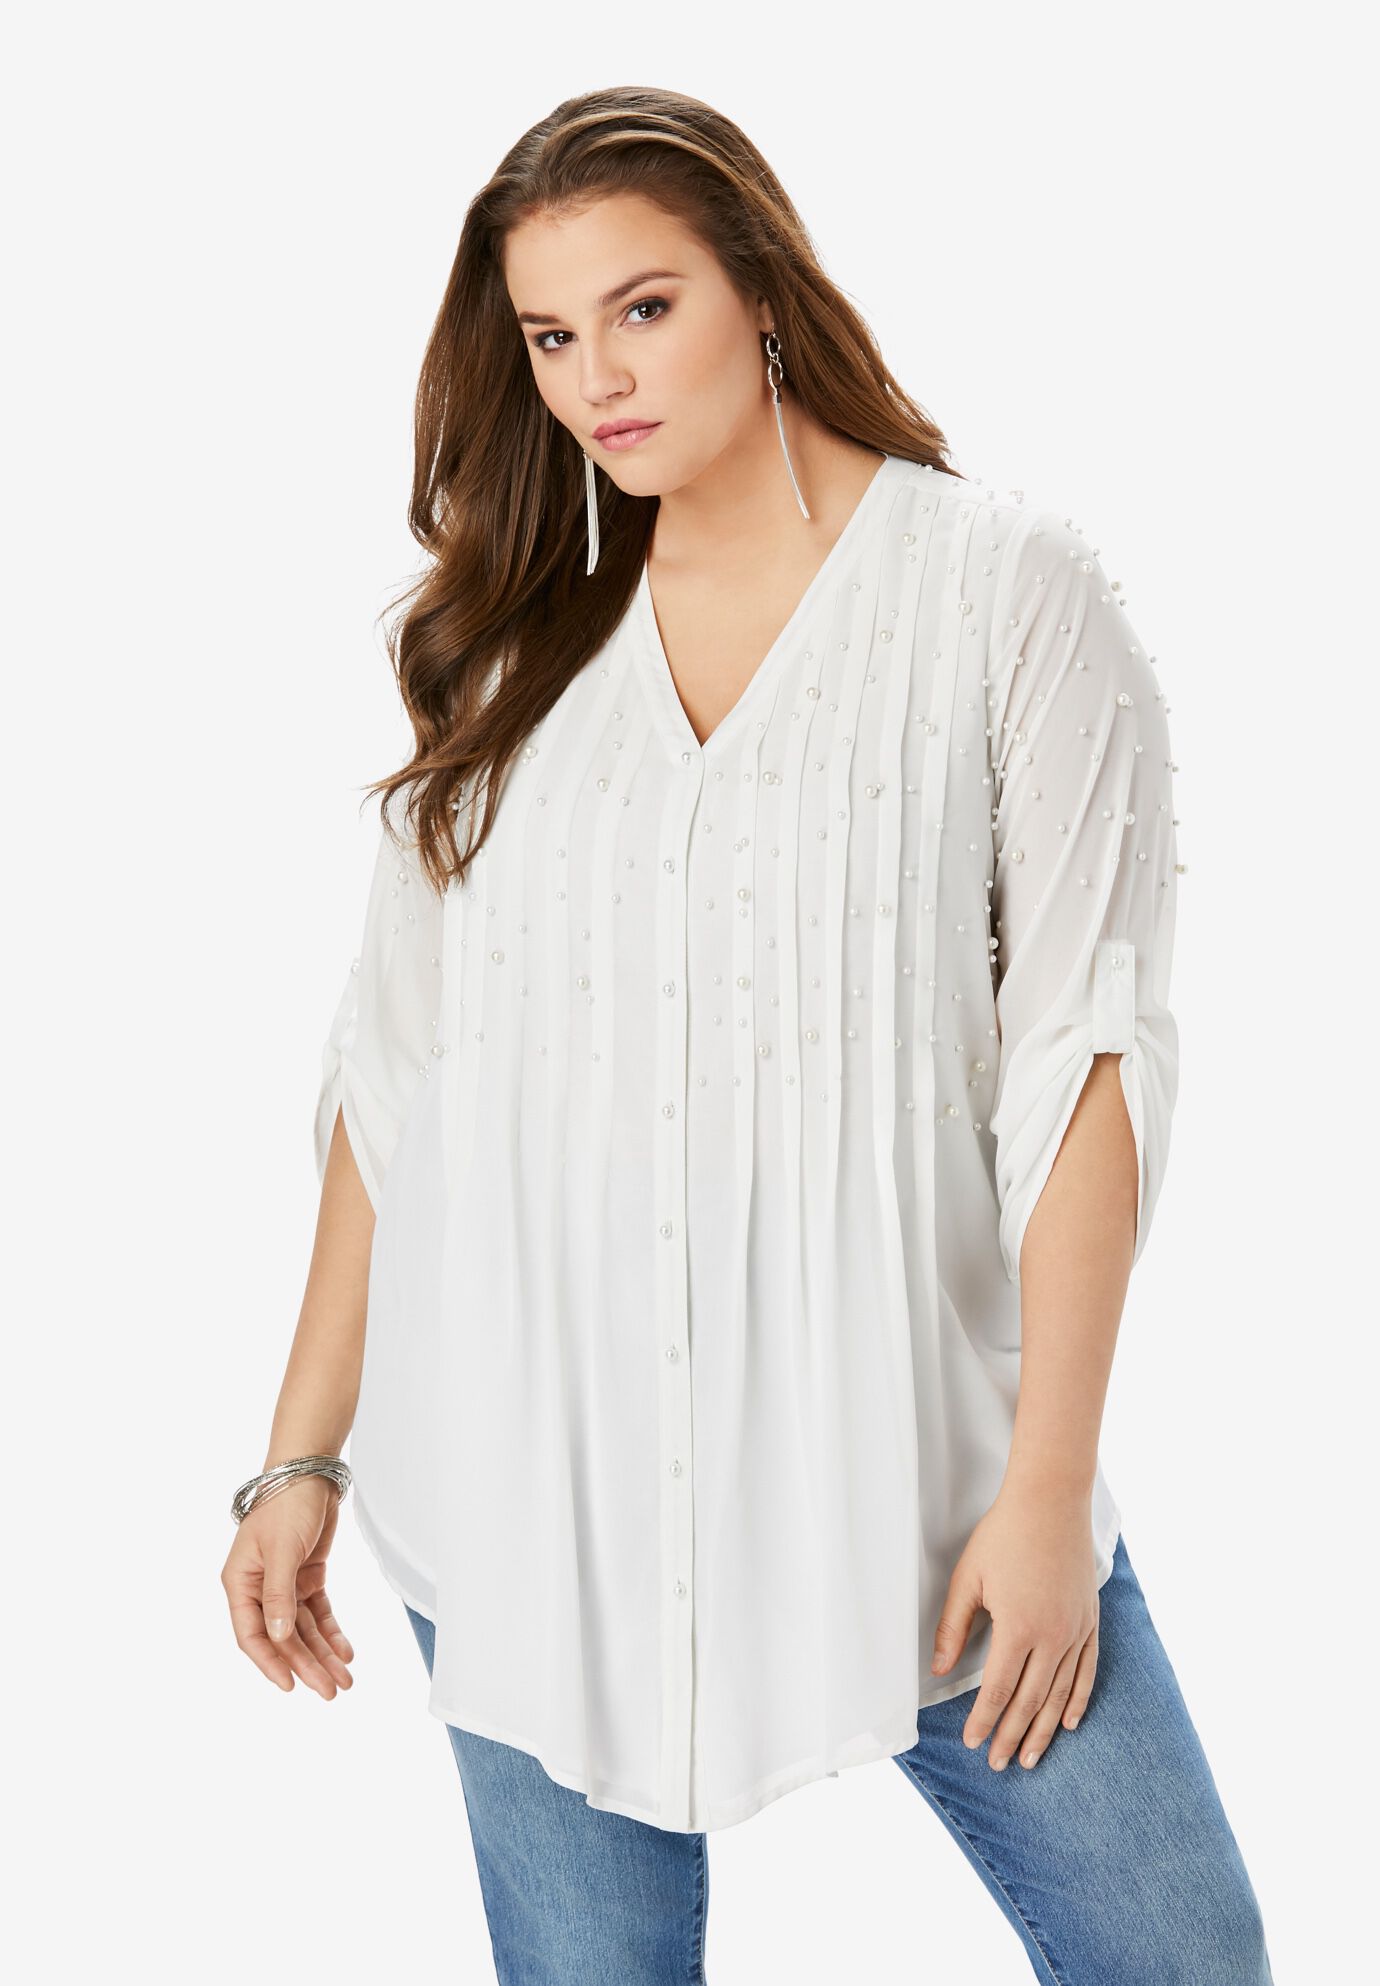 Clearance Plus Size Tops, Sweaters 